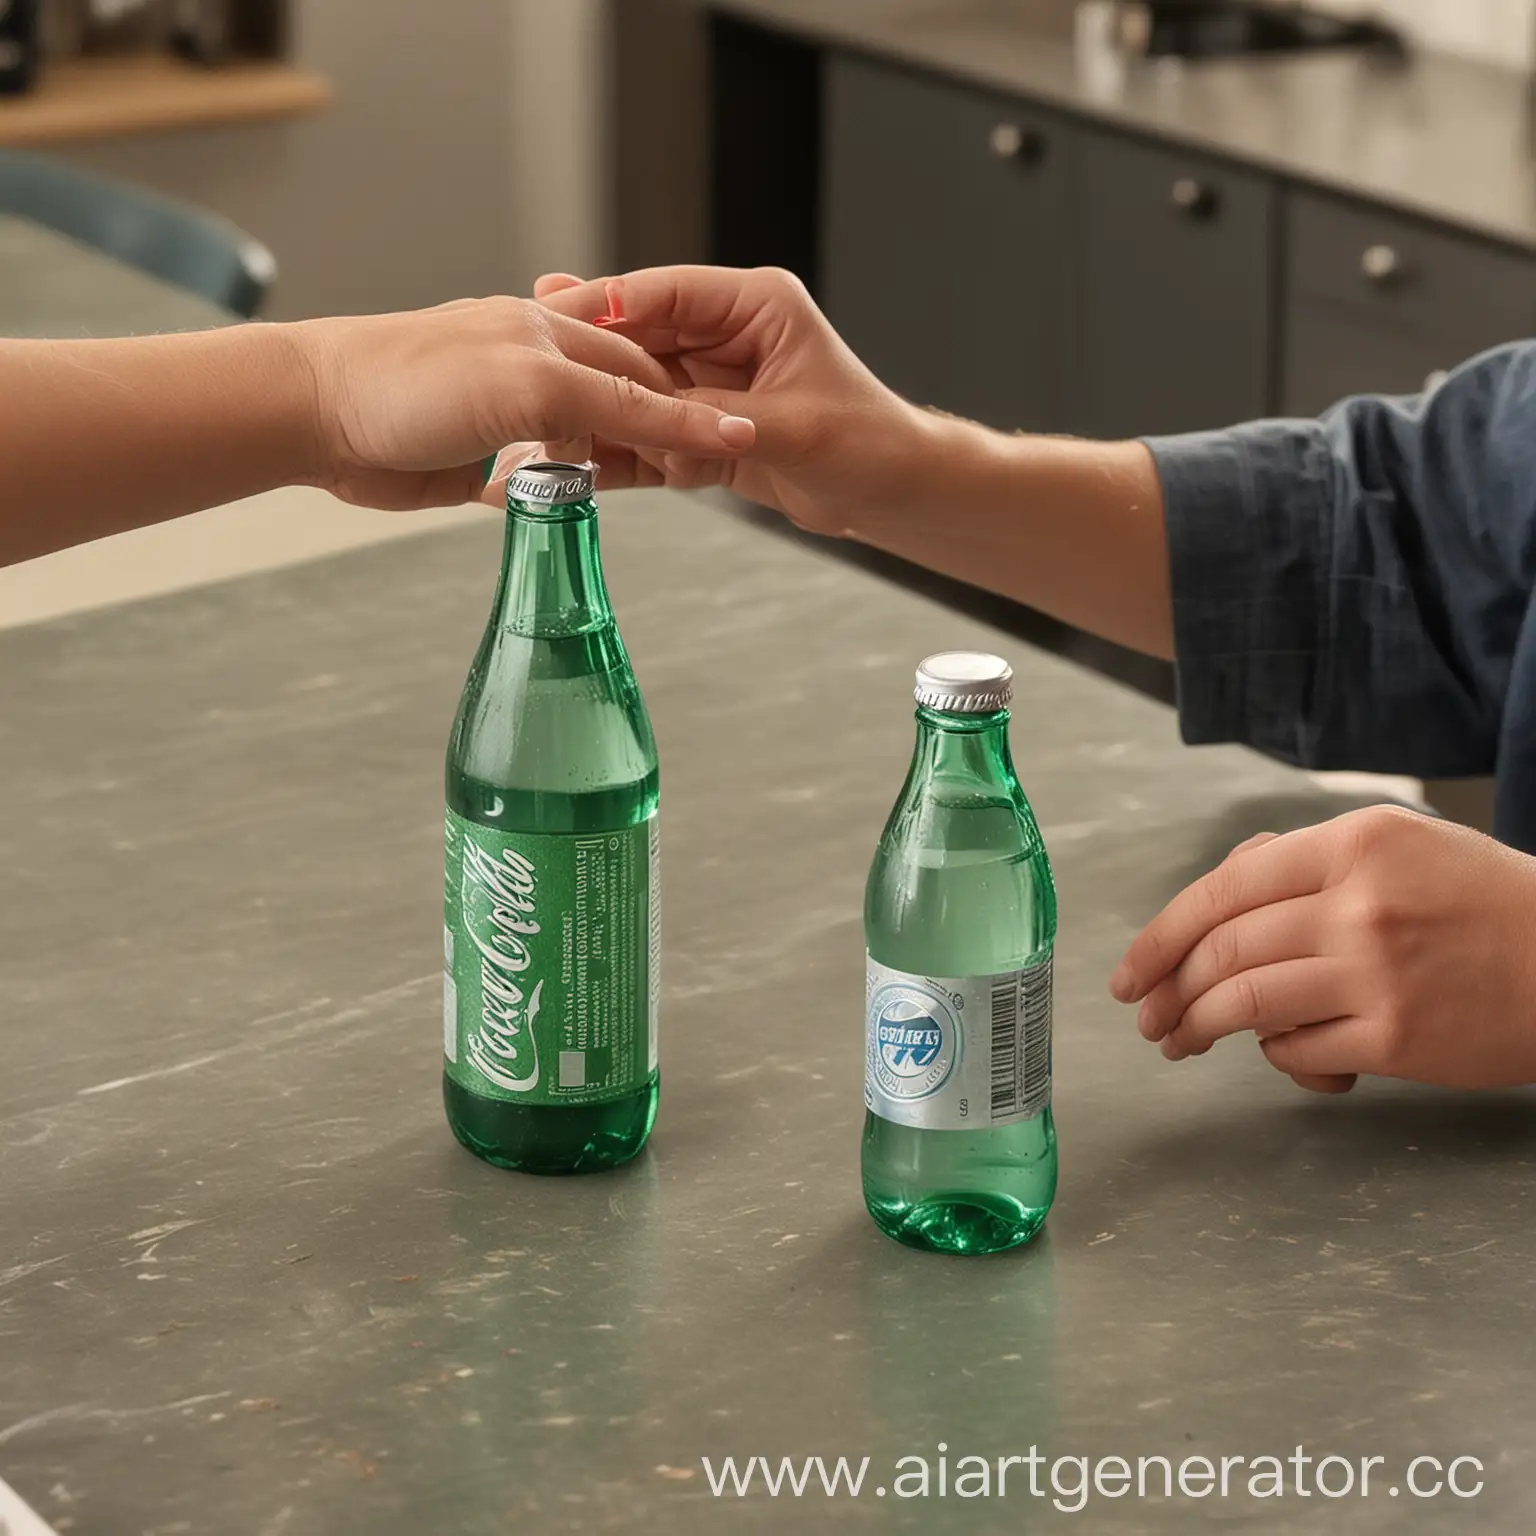 Person-Comparing-Similar-Soda-Bottles-on-Table